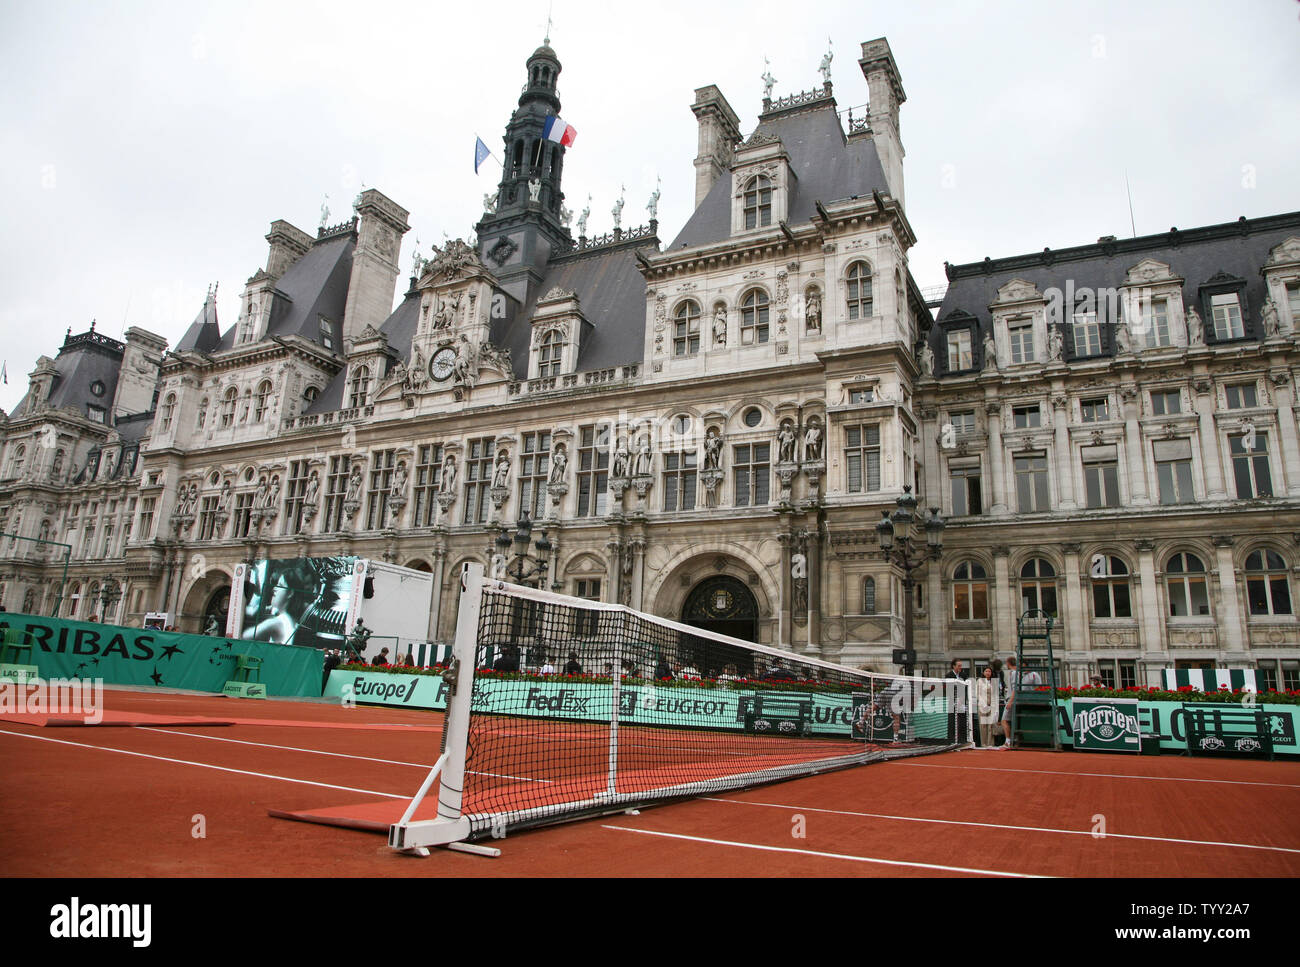 A clay court is set up in front of the Hotel de Ville (city hall) for the  launch of the exhibition "Roland Garros in the City" in Paris on June 4,  2008.